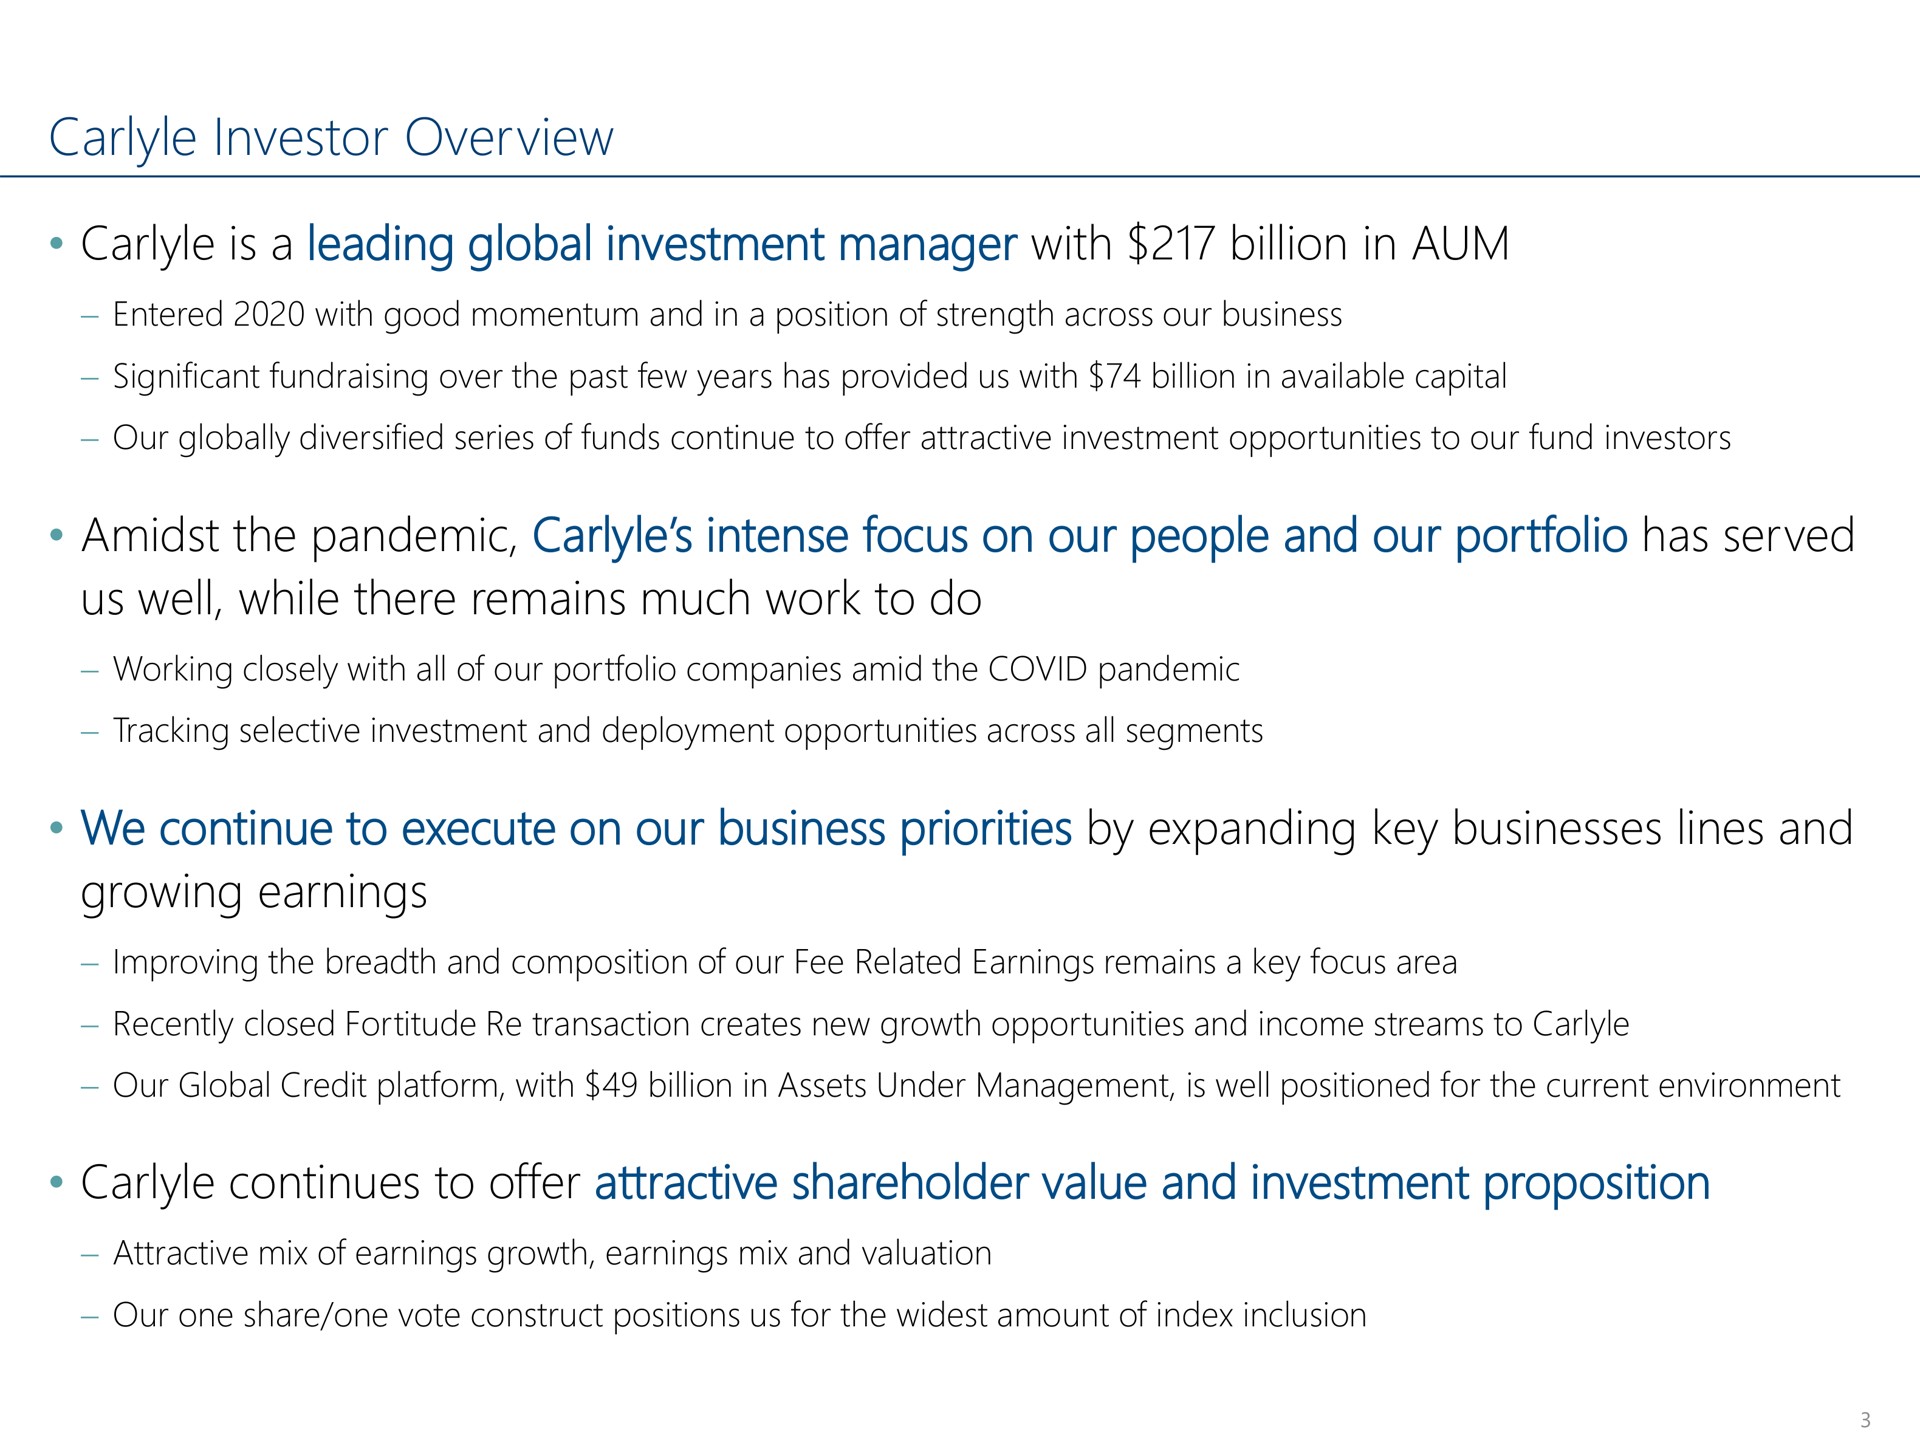 investor overview is a leading global investment manager with billion in aum amidst the pandemic intense focus on our people and our portfolio has served us well while there remains much work to do we continue to execute on our business priorities by expanding key businesses lines and growing earnings continues to offer attractive shareholder value and investment proposition | Carlyle